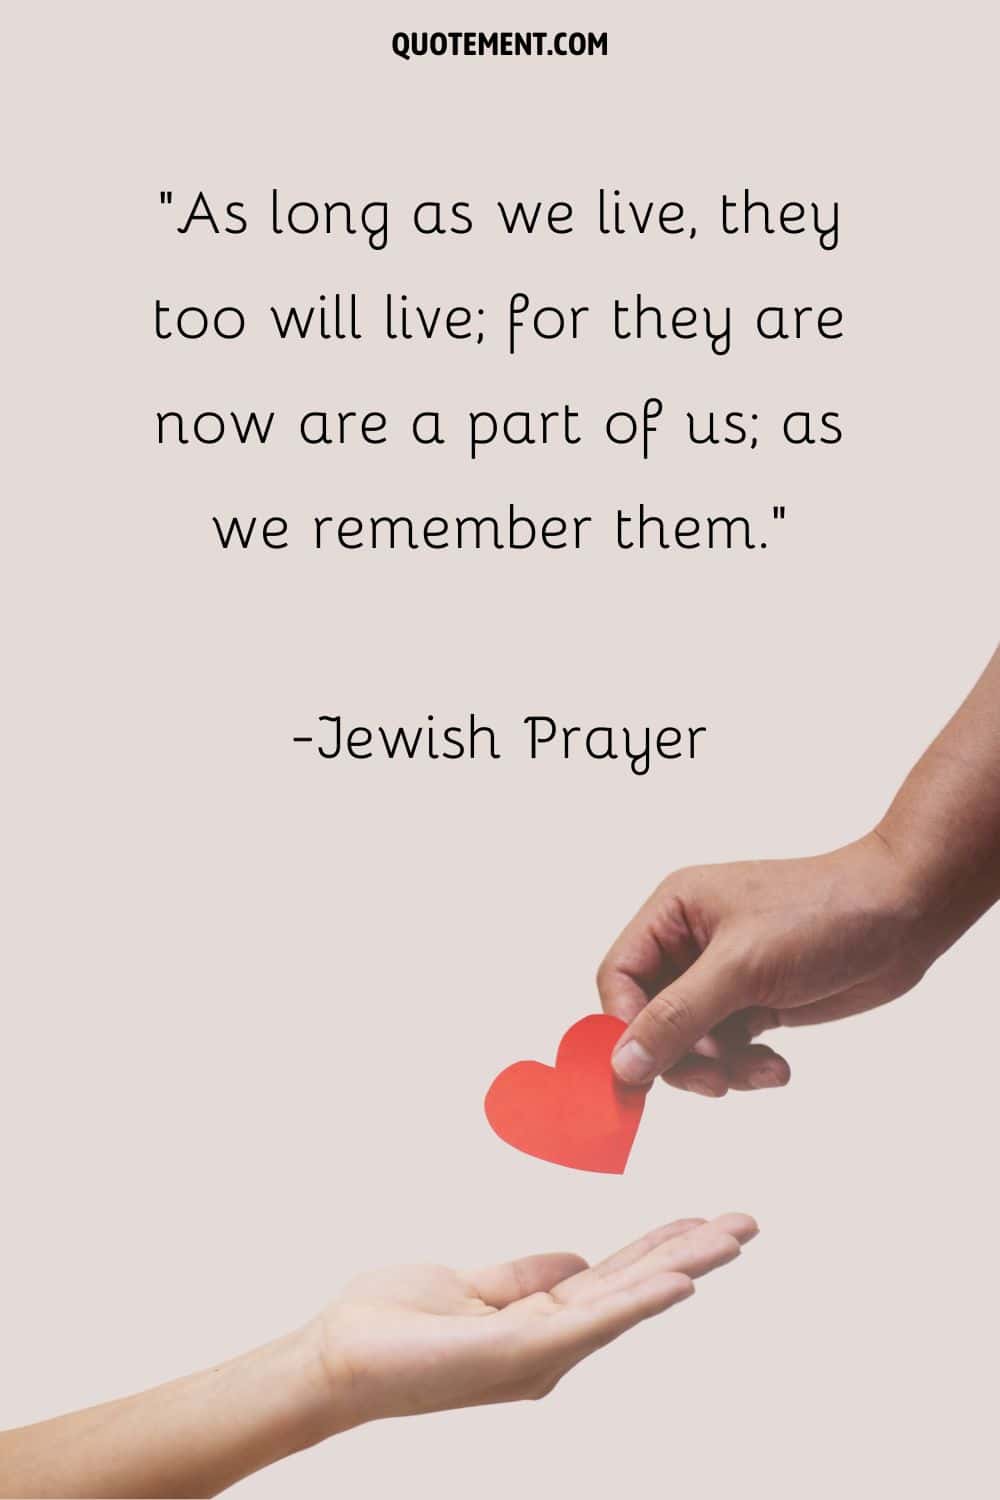 As long as we live, they too will live; for they are now are a part of us; as we remember them.” — Jewish Prayer